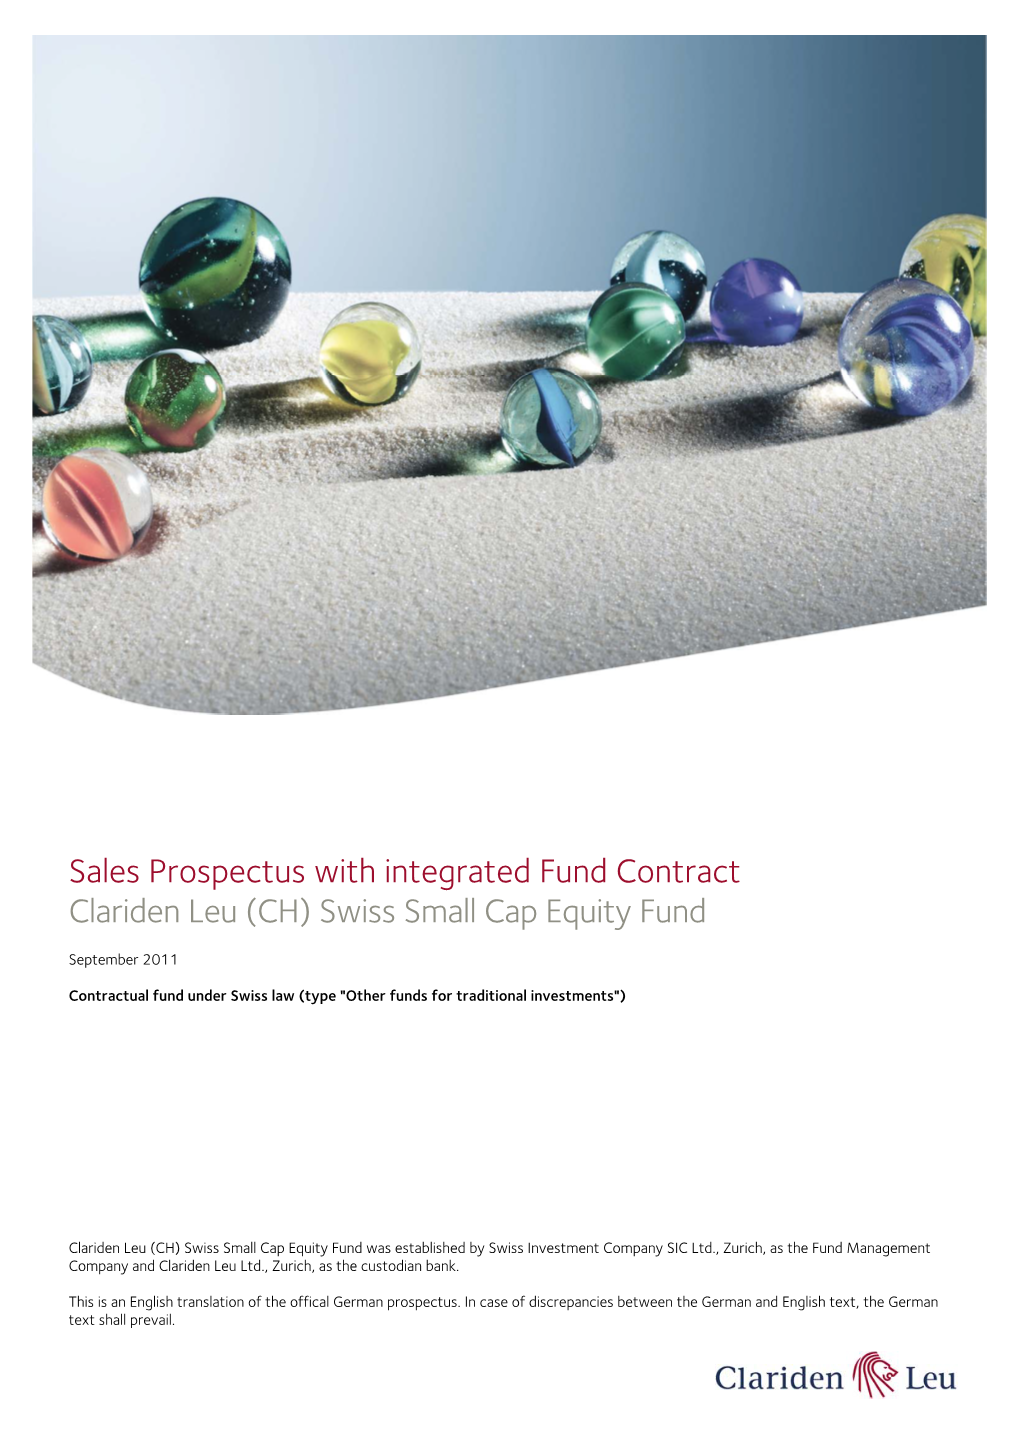 Sales Prospectus with Integrated Fund Contract Clariden Leu (CH) Swiss Small Cap Equity Fund